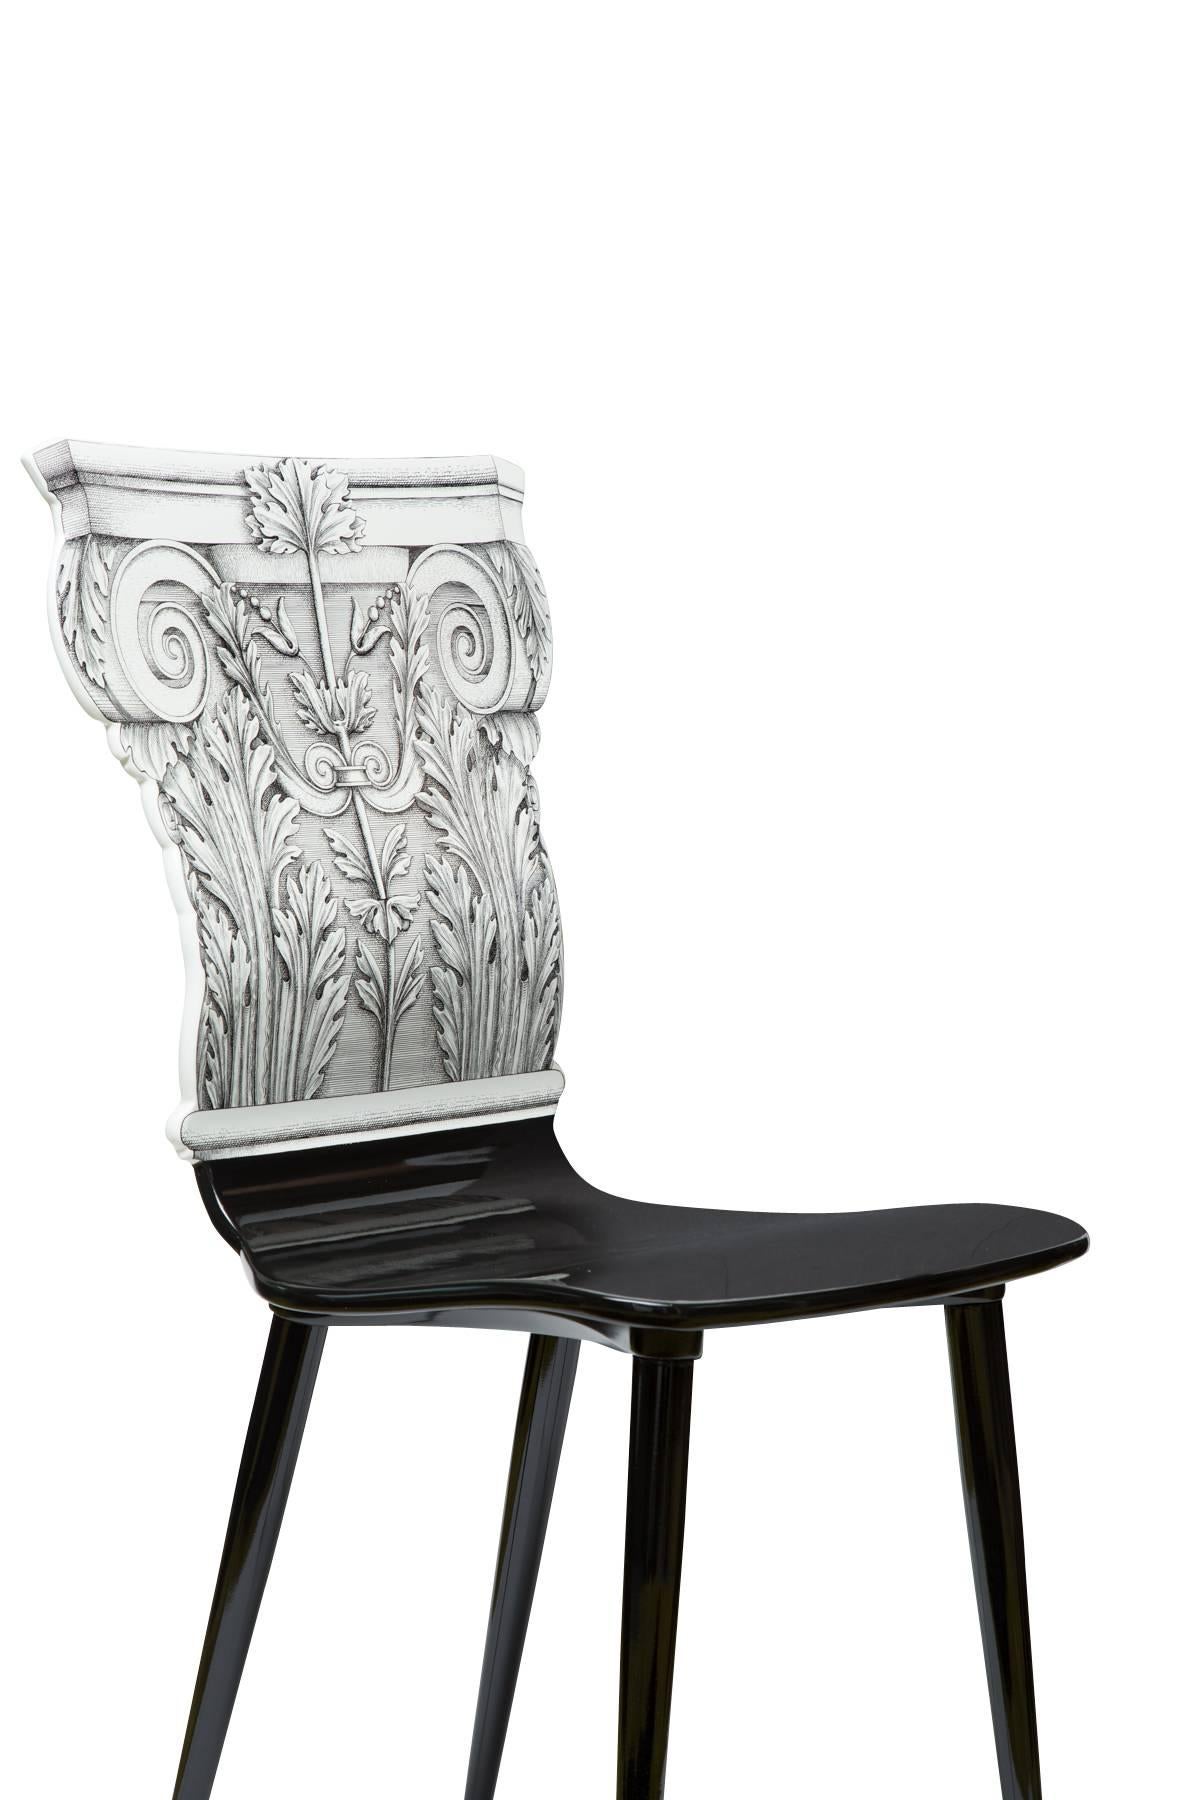 This chair has a lithographically applied graphic which is hand-finished and covered with a smooth lacquer.

12 of 20 produced in 2016.

The Italian artist and illustrator Piero Fornasetti was one of the wittiest and most imaginative design talents